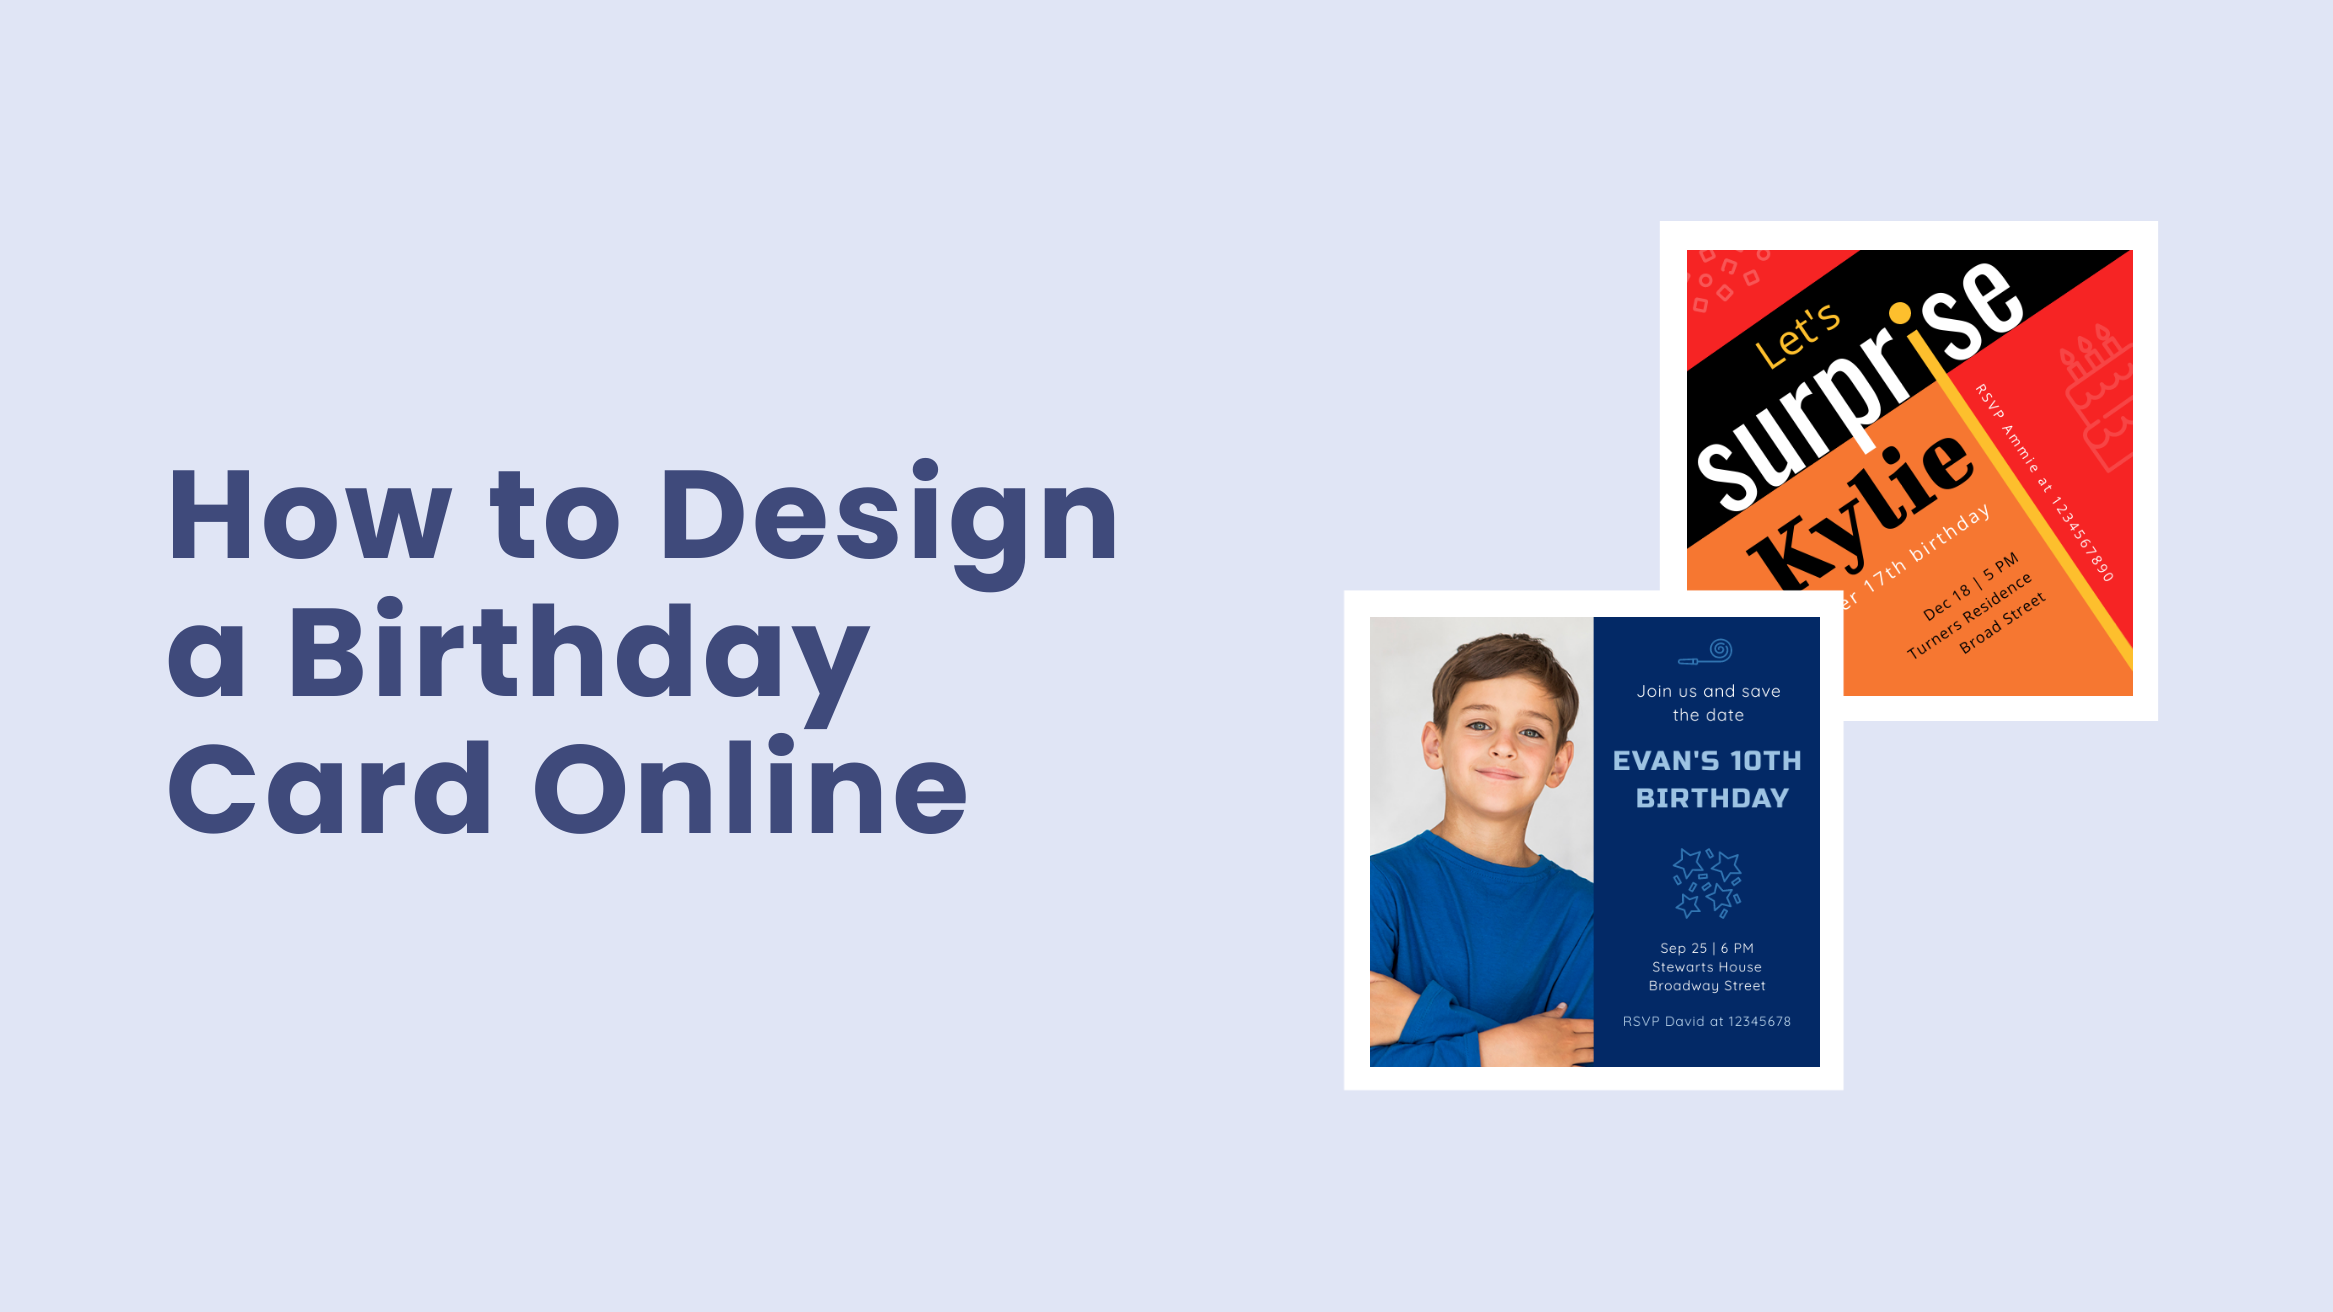 How to Design a Birthday Card Online